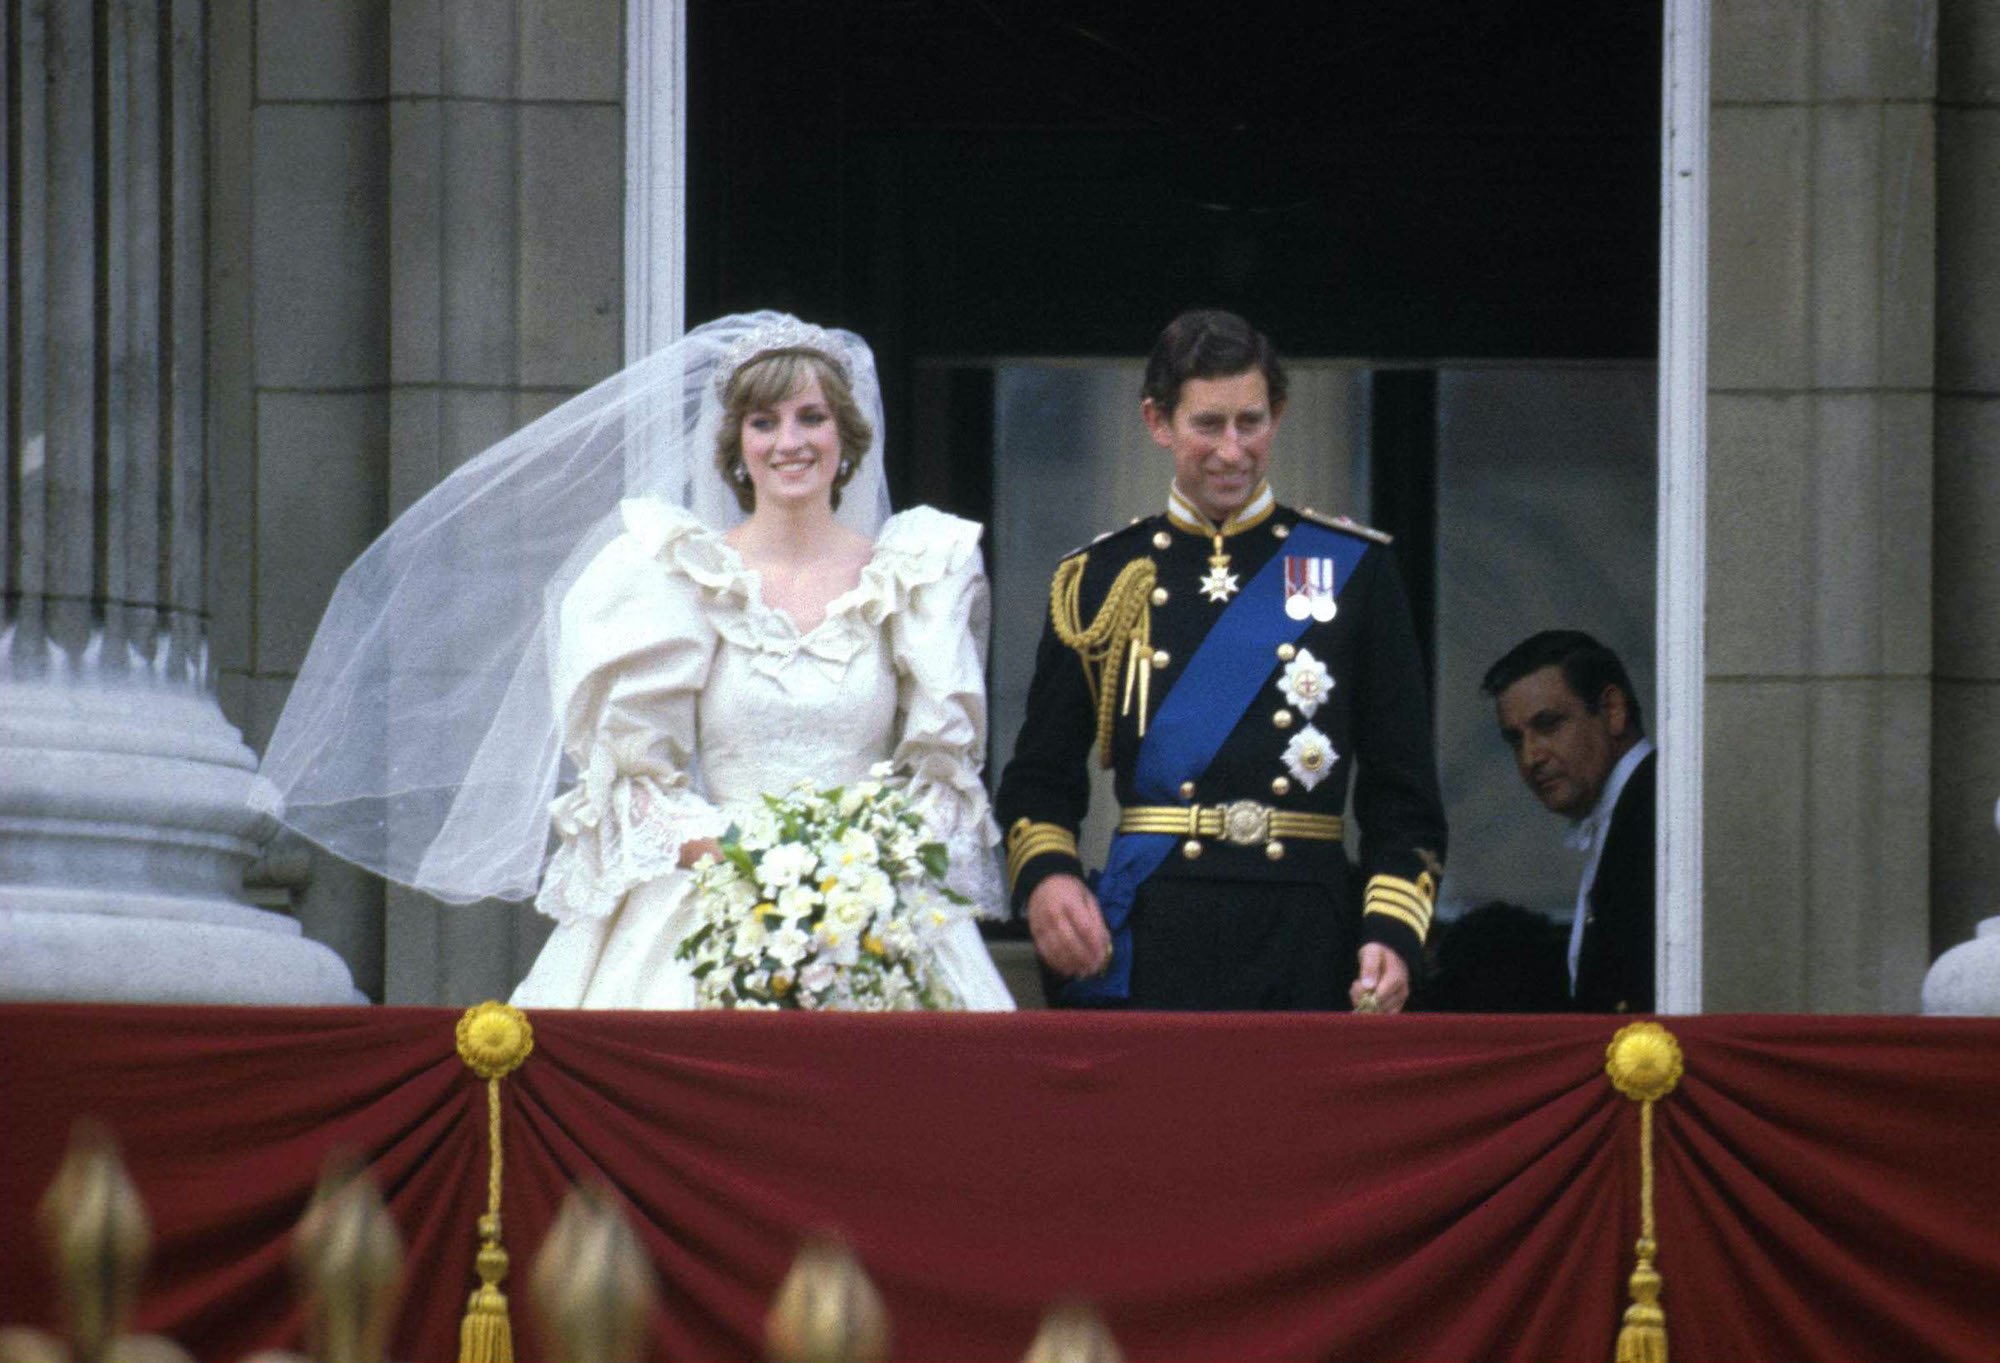 Princess Diana and Prince Charles on the balcony of Buckingham Palace after their royal wedding